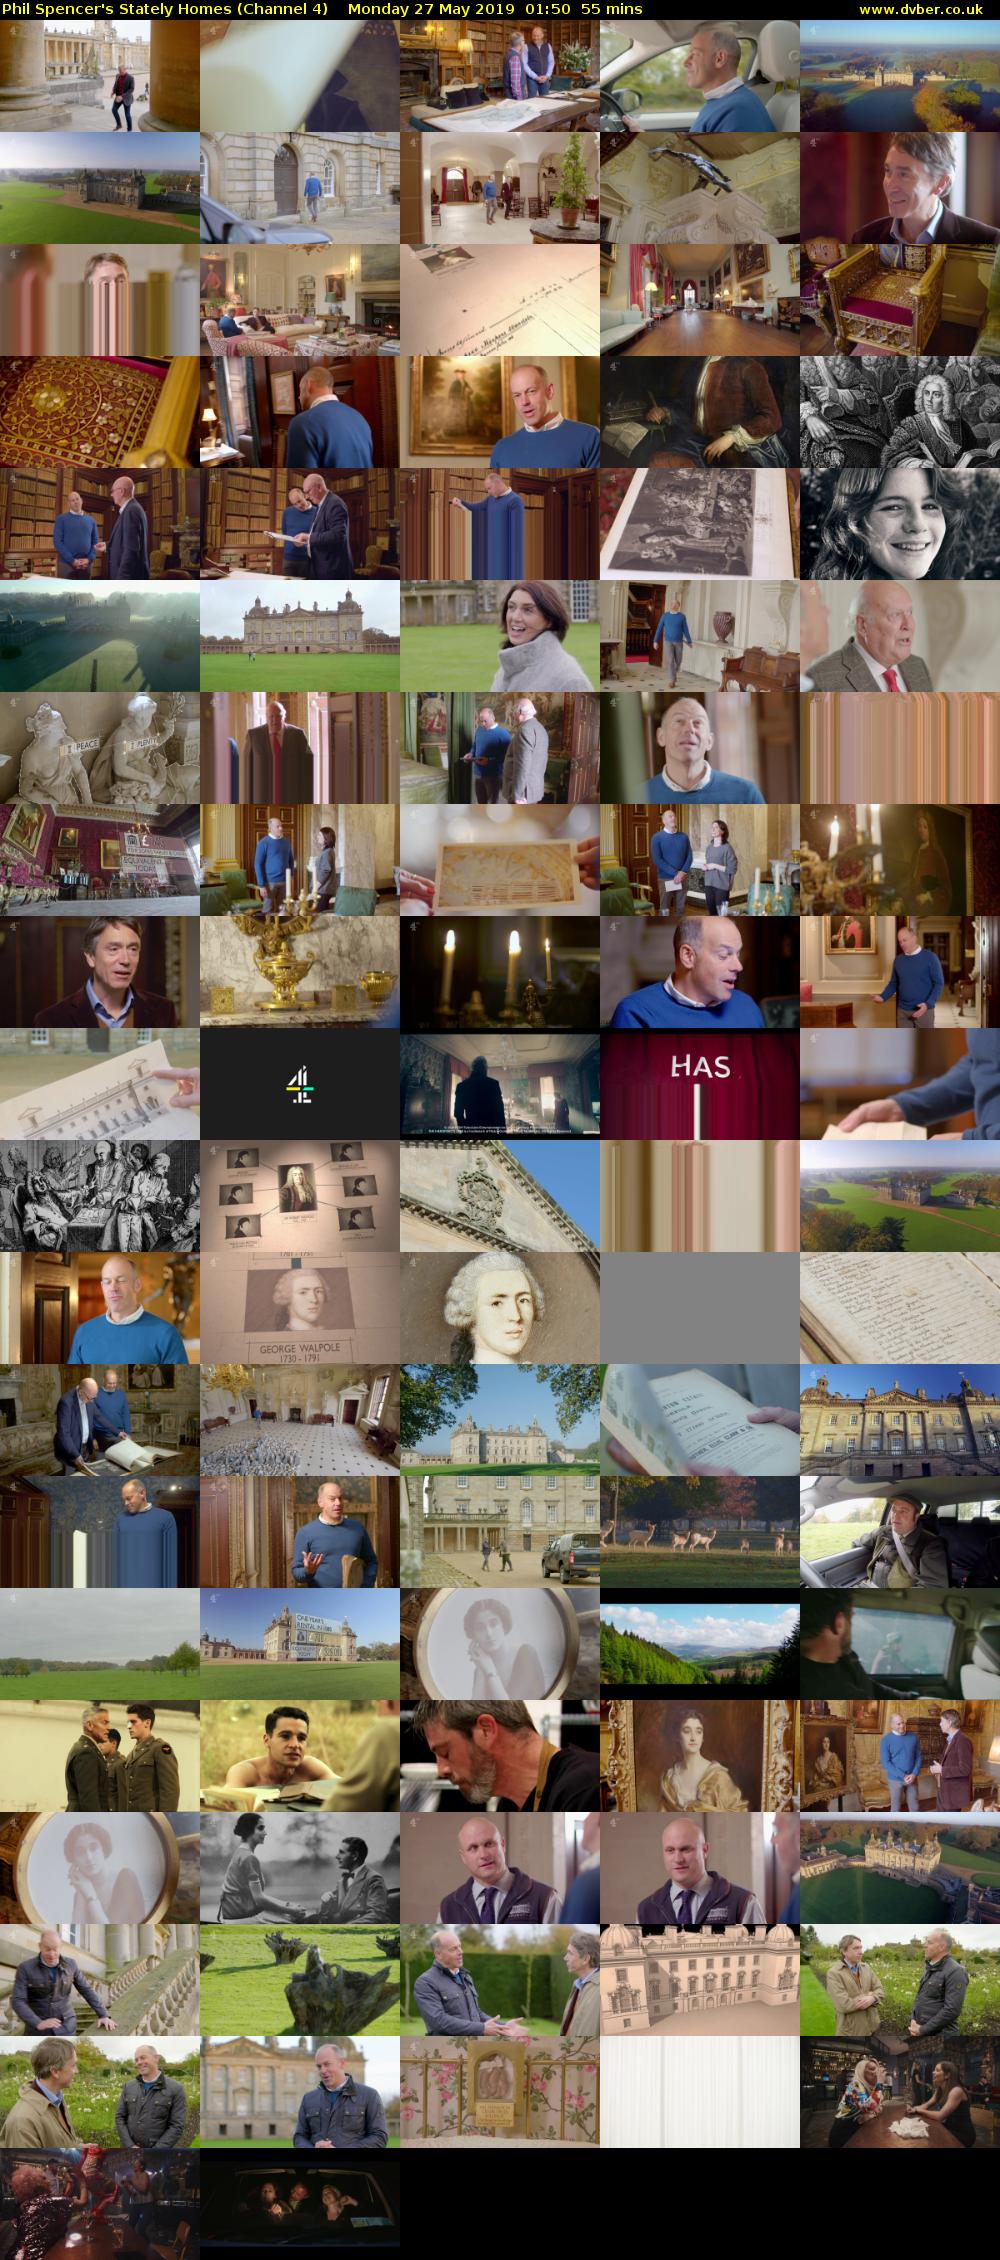 Phil Spencer's Stately Homes (Channel 4) Monday 27 May 2019 01:50 - 02:45